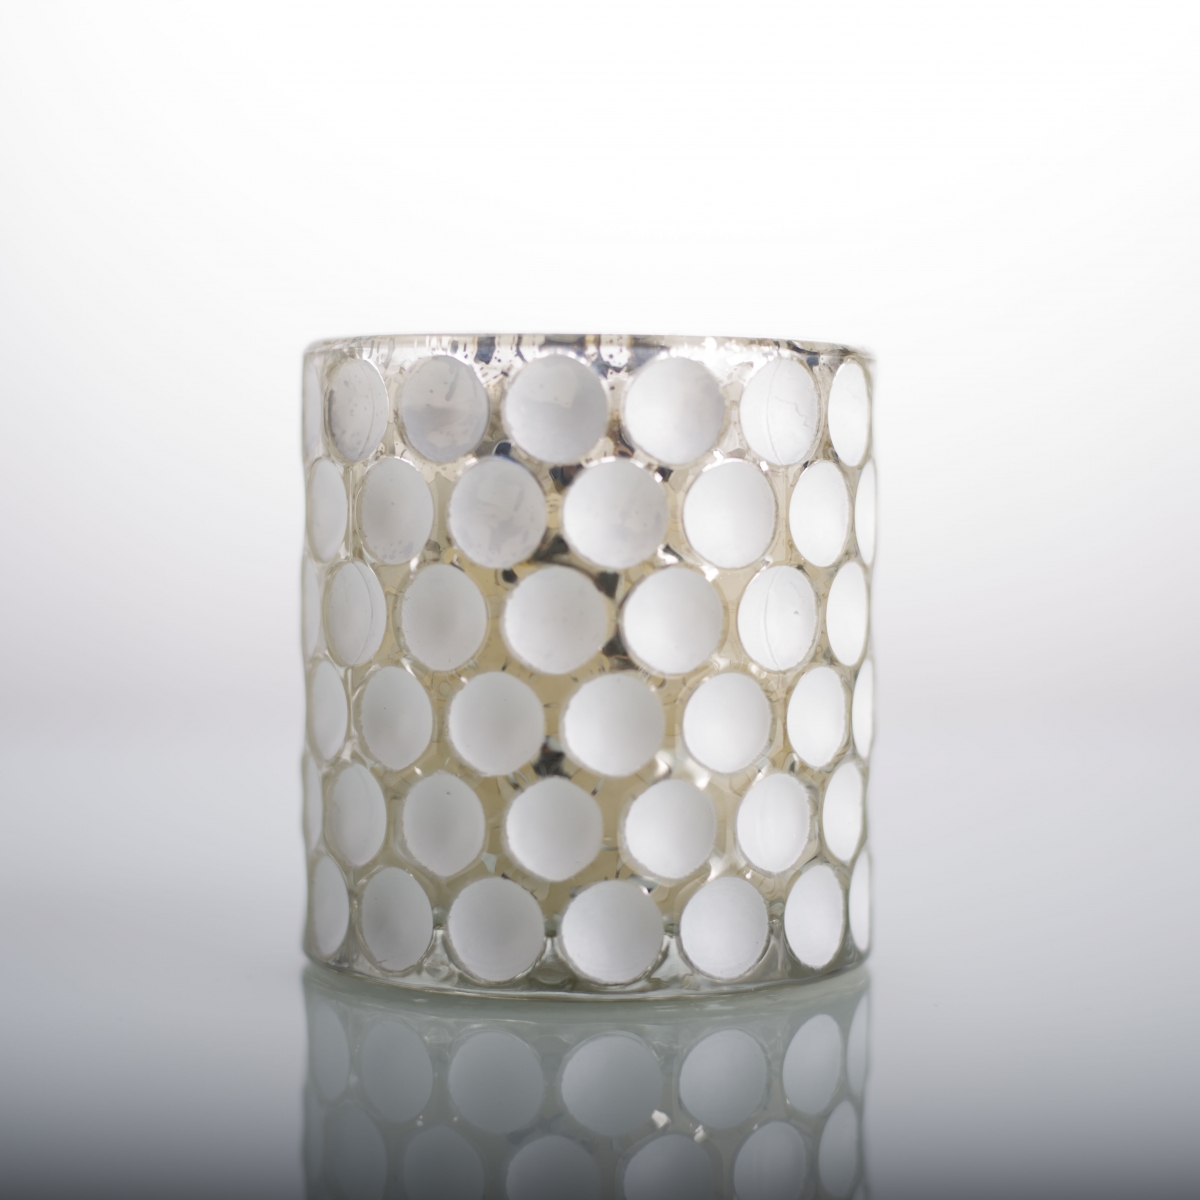 Glass Candle Holder ：White Honeycomb ,Embossing Dot ,Silver Electroplate ,Christmas Home Decoration ,China Factory Price-HOWCANDLE-Candles,Scented Candles,Aromatherapy Candles,Soy Candles,Vegan Candles,Jar Candles,Pillar Candles,Candle Gift Sets,Essential Oils,Reed Diffuser,Candle Holder,